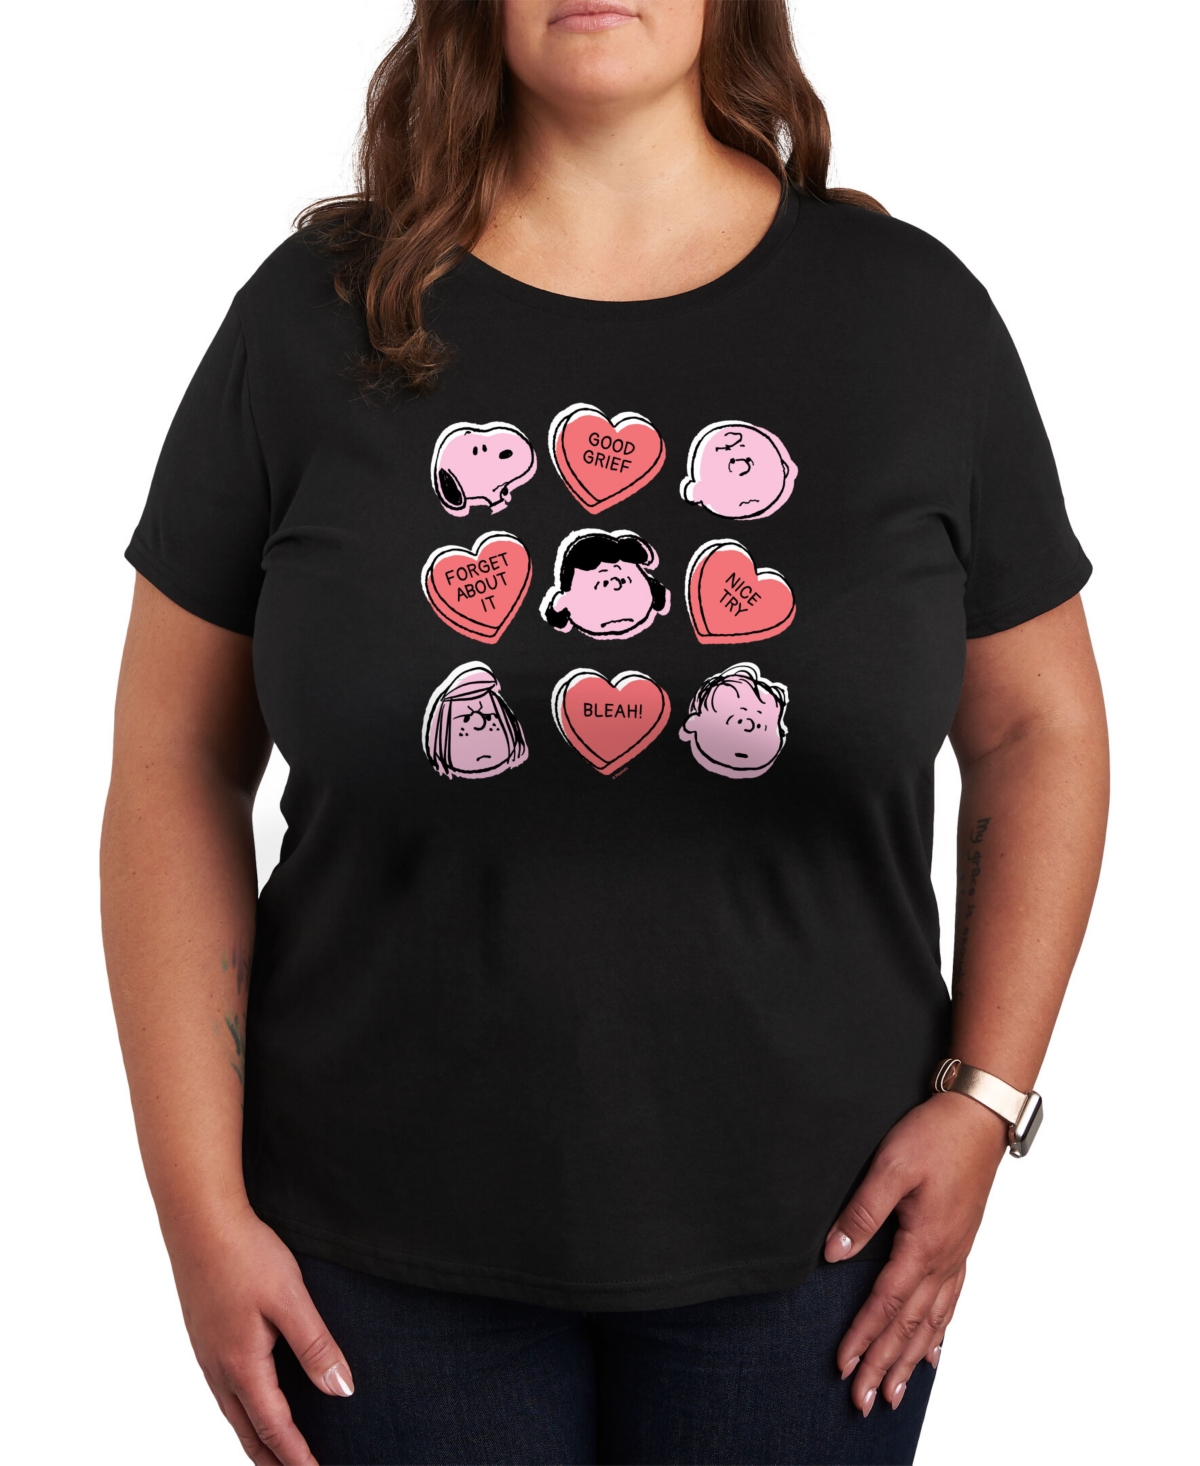 Air Waves Trendy Plus Size Peanuts Valentine's Day Graphic T-shirt - Black